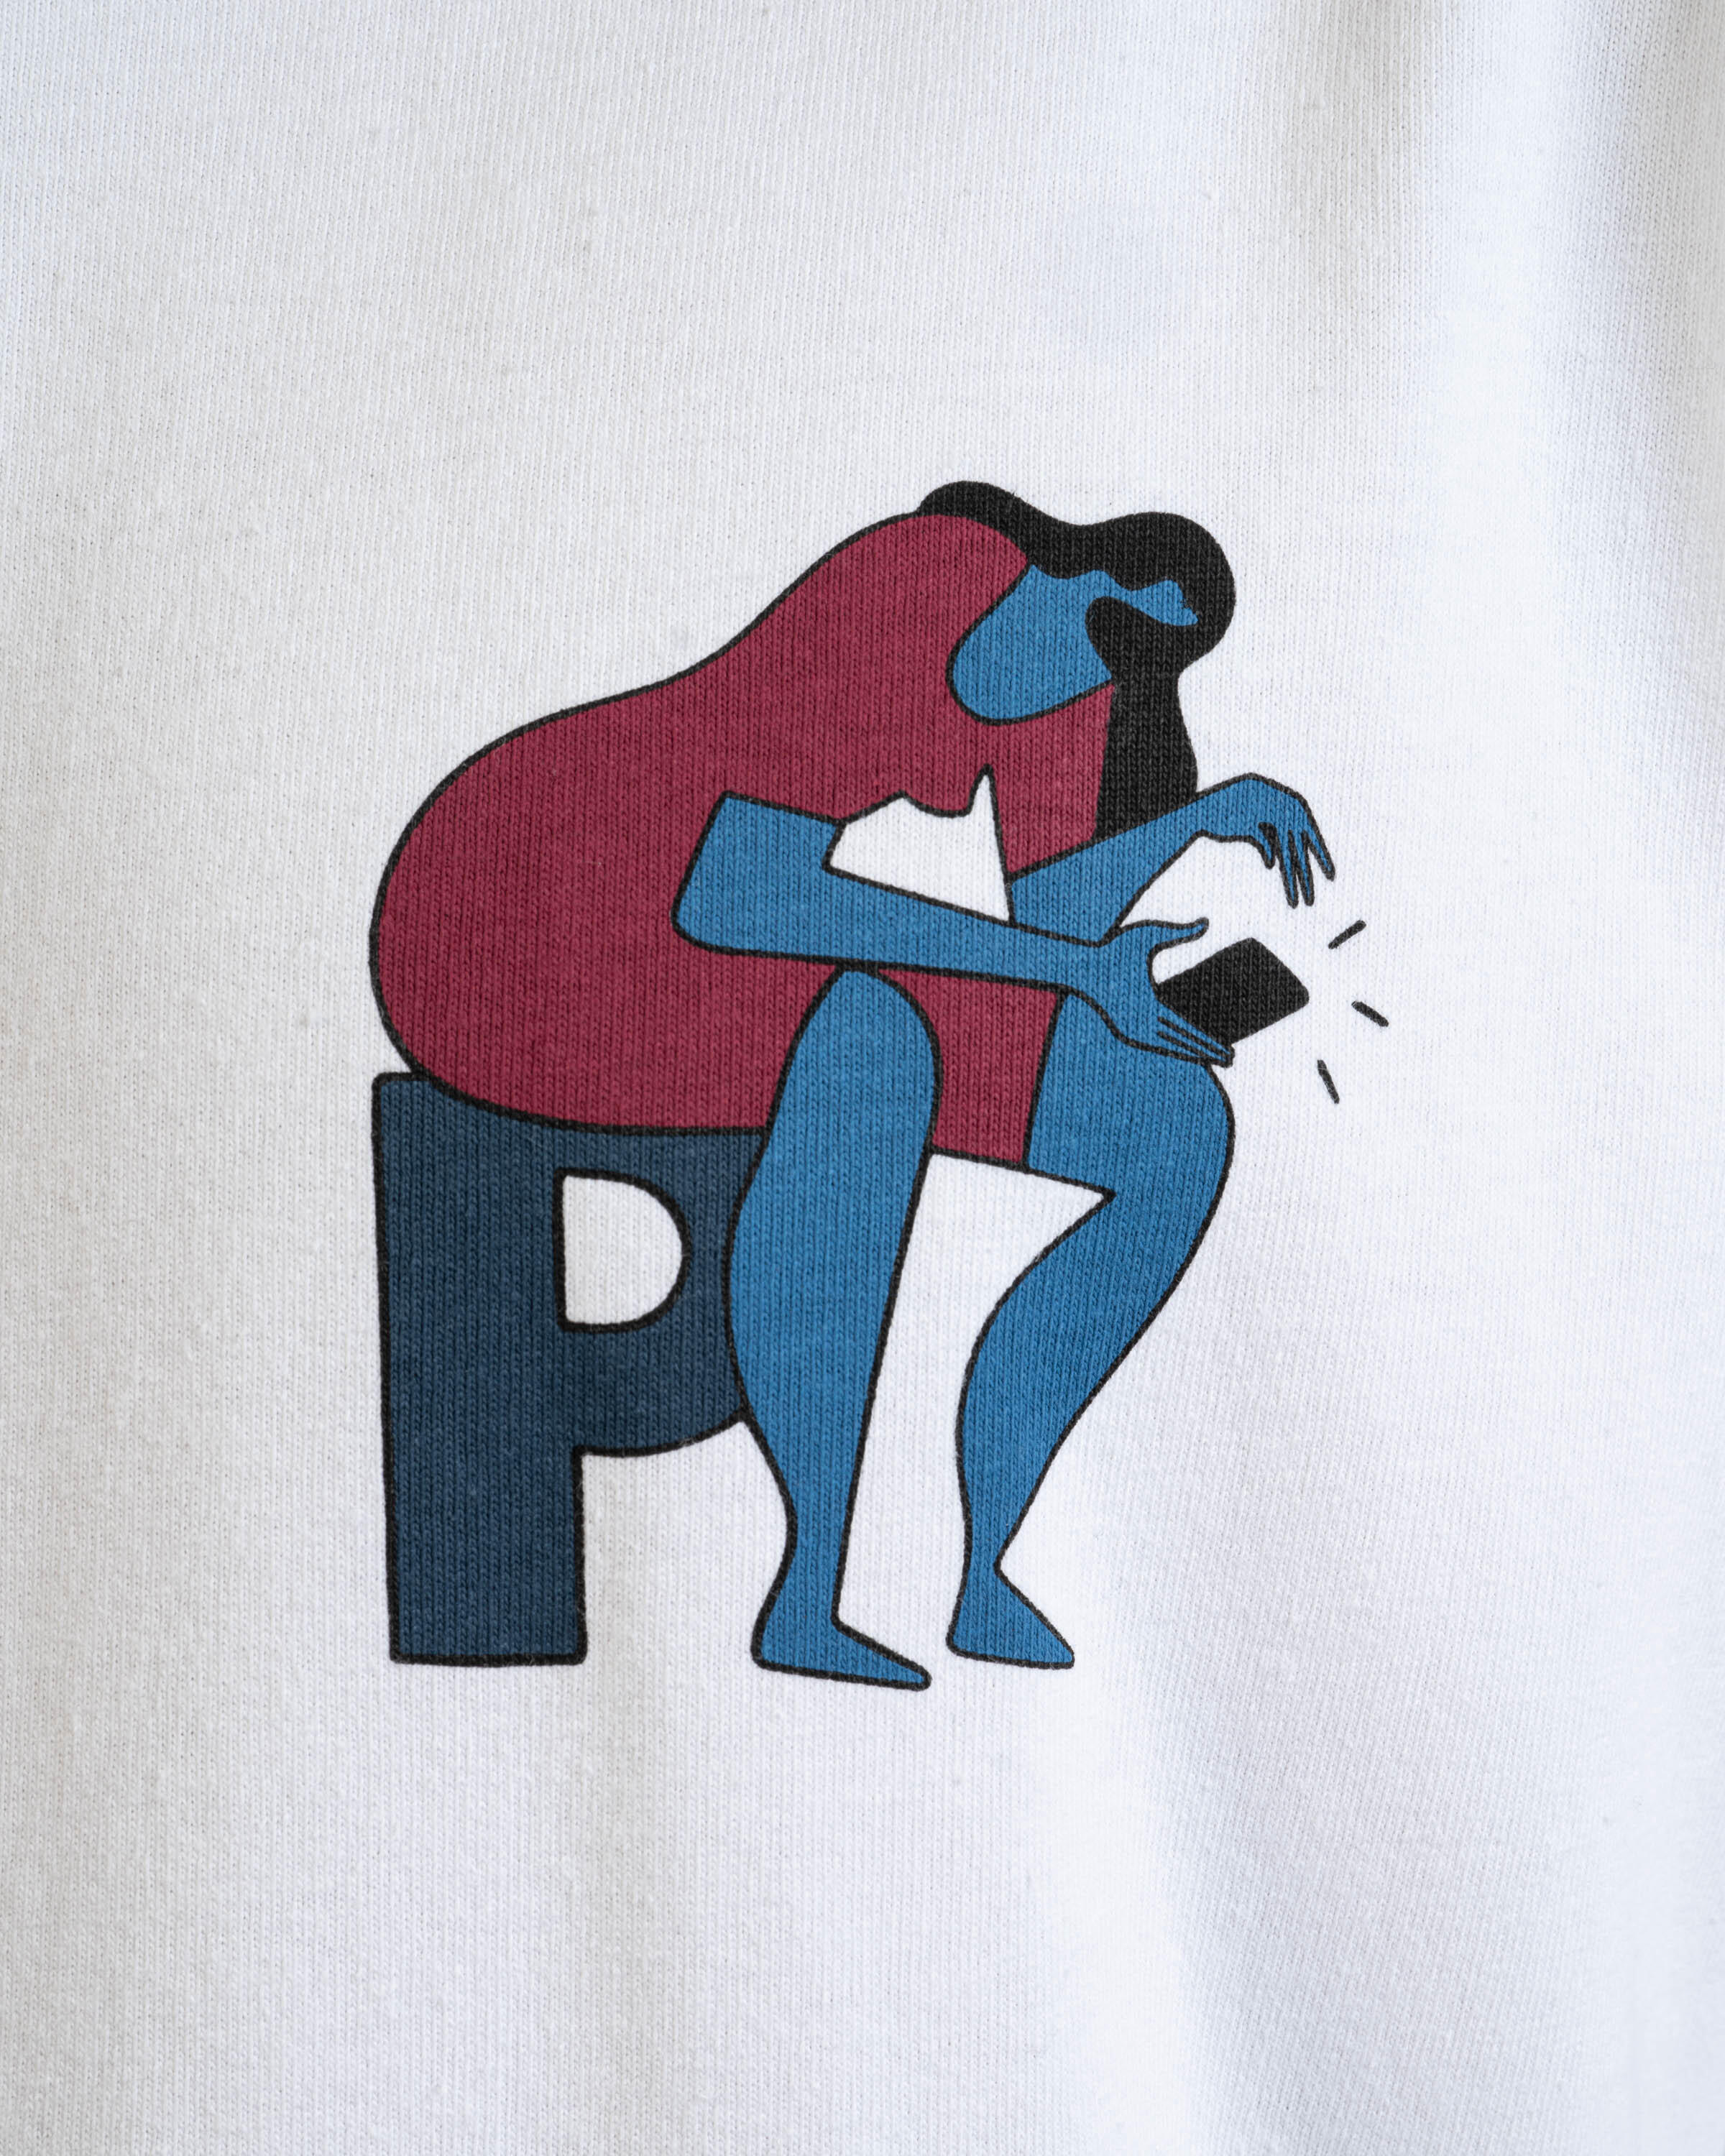 by Parra insecure days t-shirt